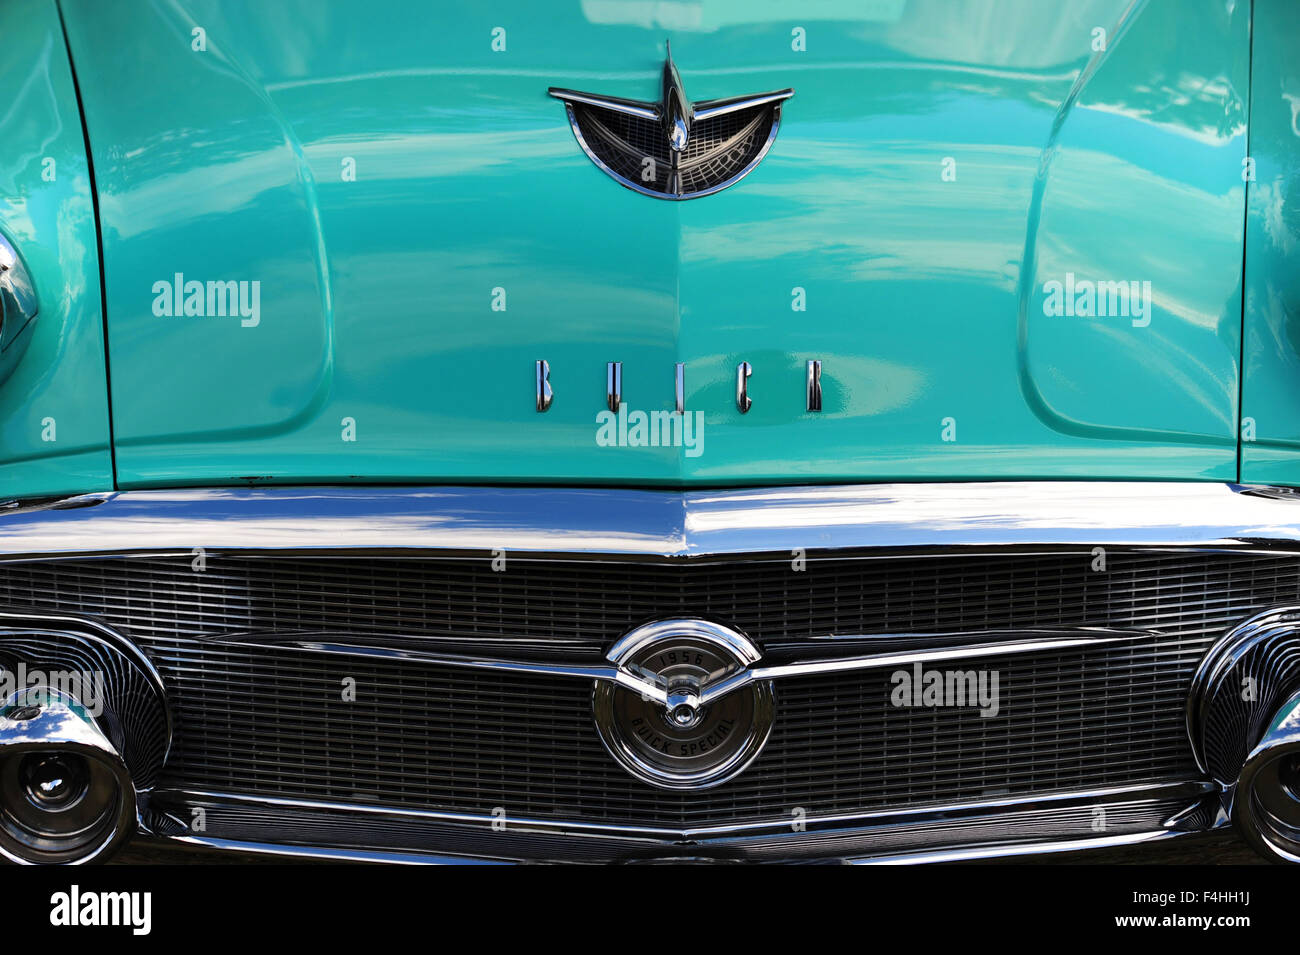 The front end of the 1956 Buick with chrome bumper and hood ornament American made classic car automobile Jet airplane Stock Photo